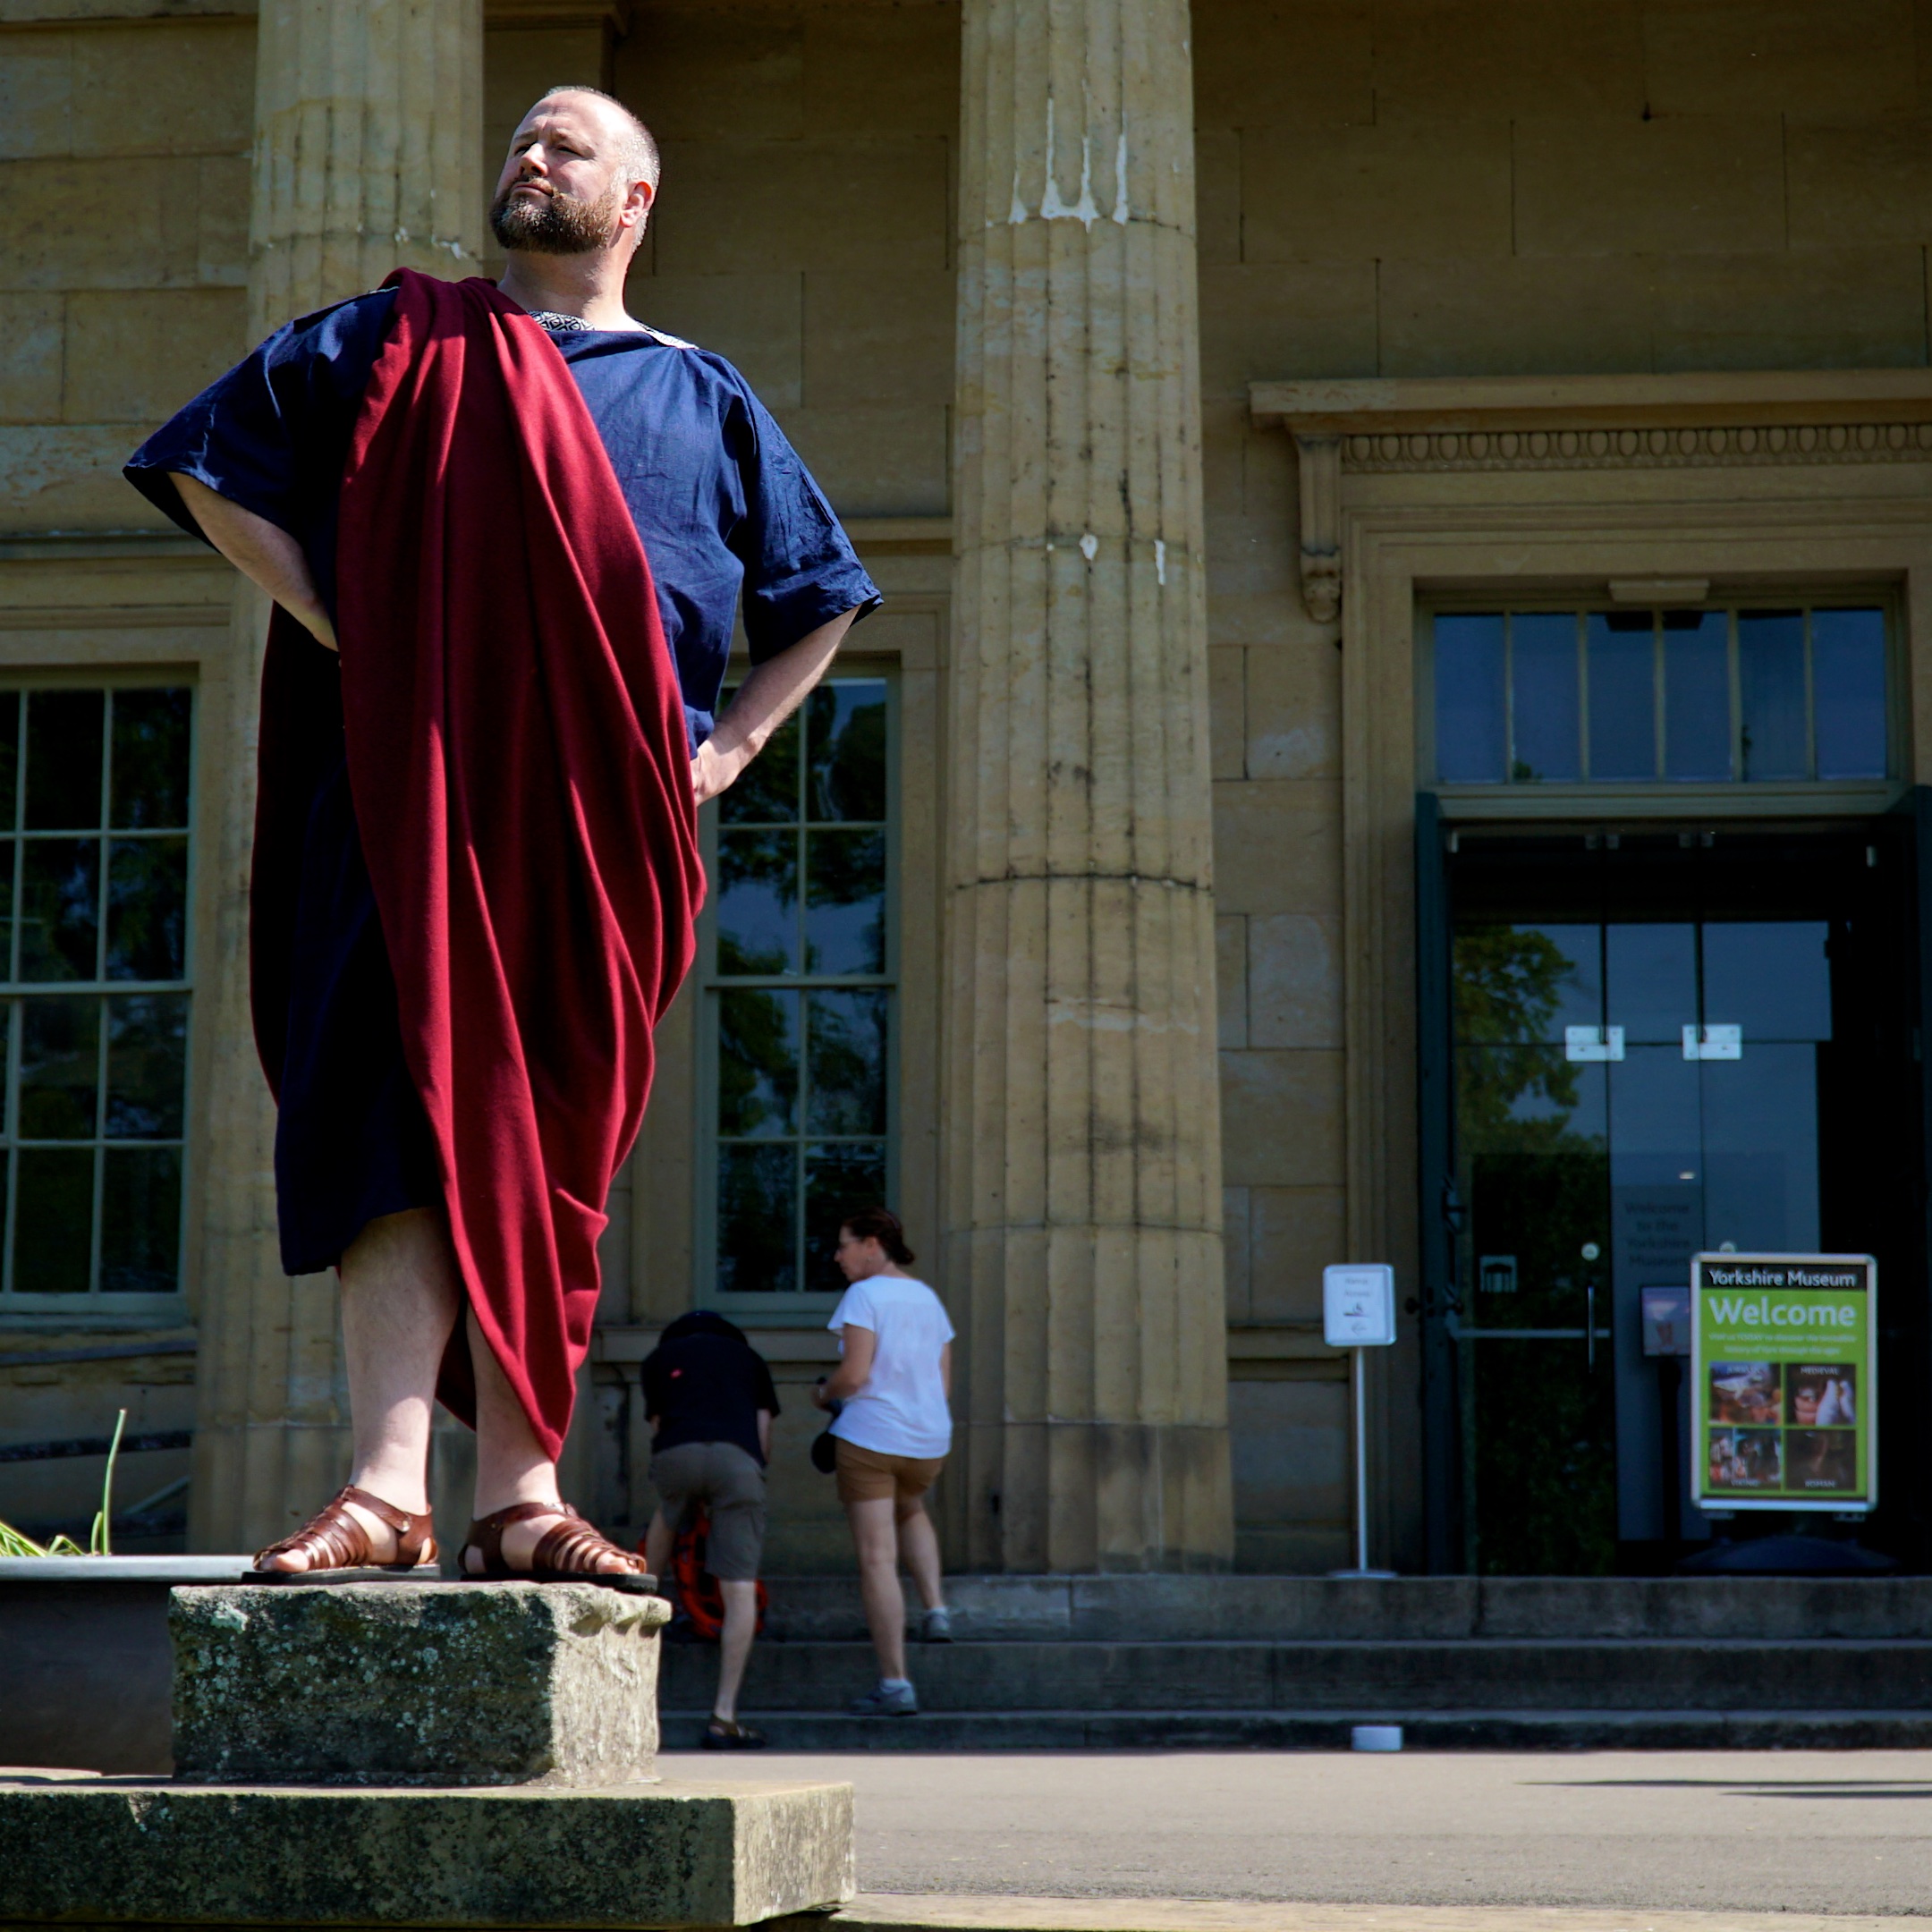 A Roman stands looking self-important in front of the classical cloumns of the Yorkshire Musuem in York